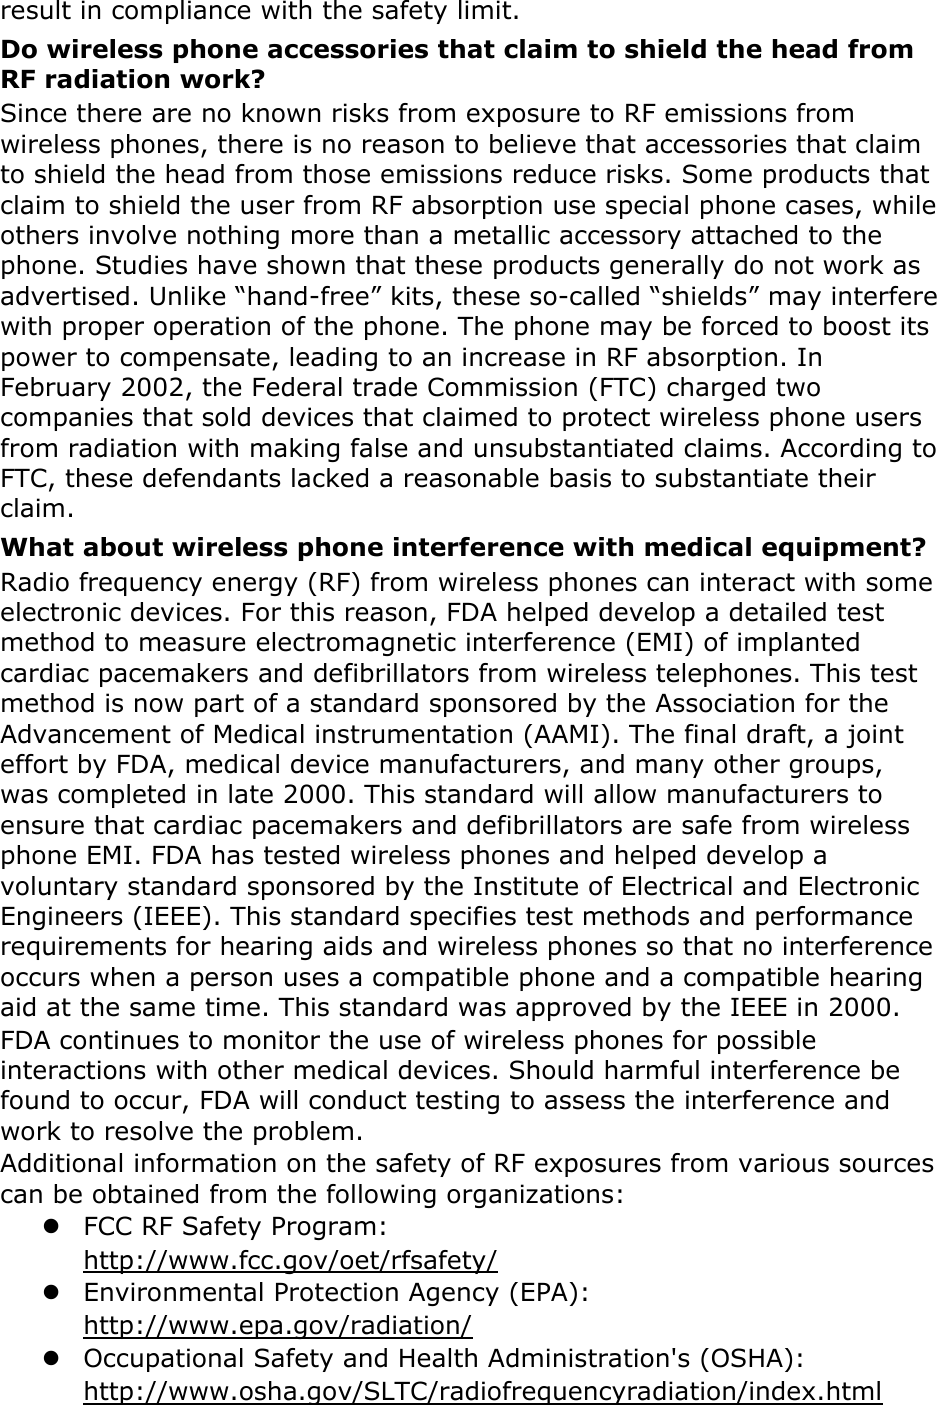 Page 12 of Samsung Electronics Co GTI9100P Cellular/PCS WCDMA/GSM/EDGE Phone with WLAN, RFID and Bluetooth User Manual